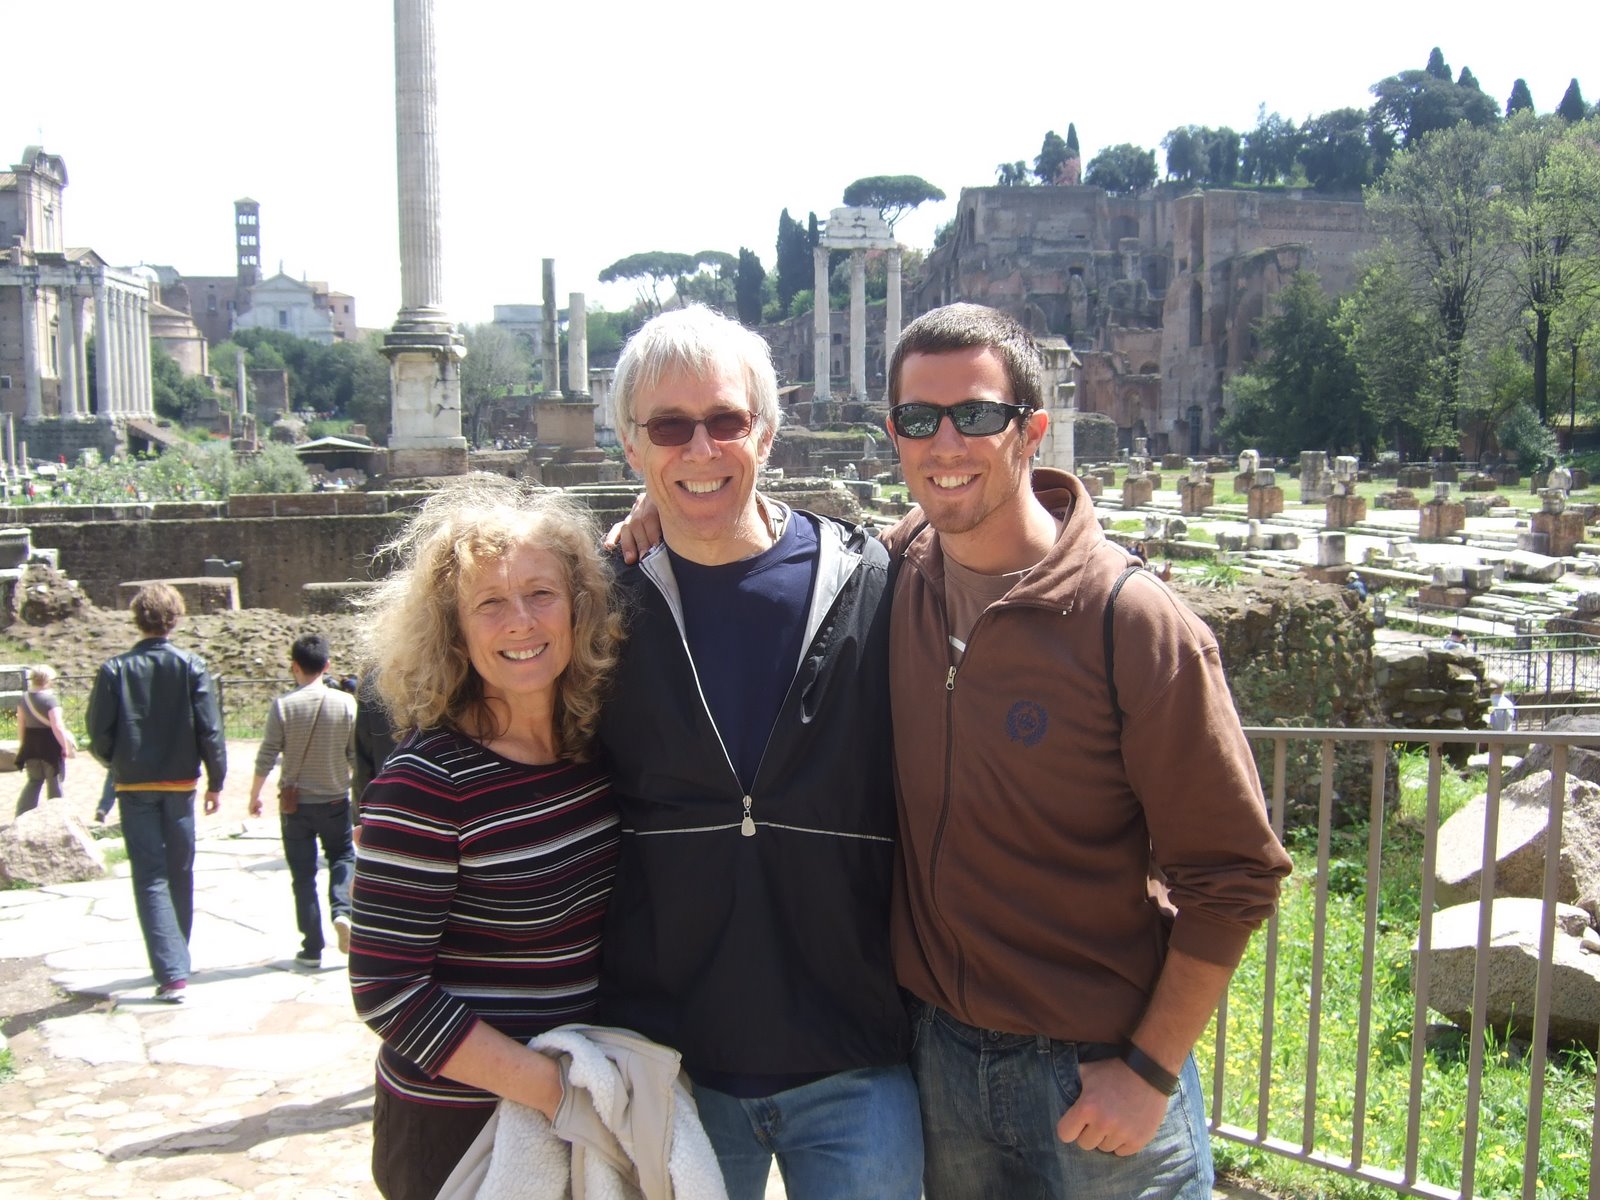 [Mom+and+Dad+in+Roma+028.jpg]